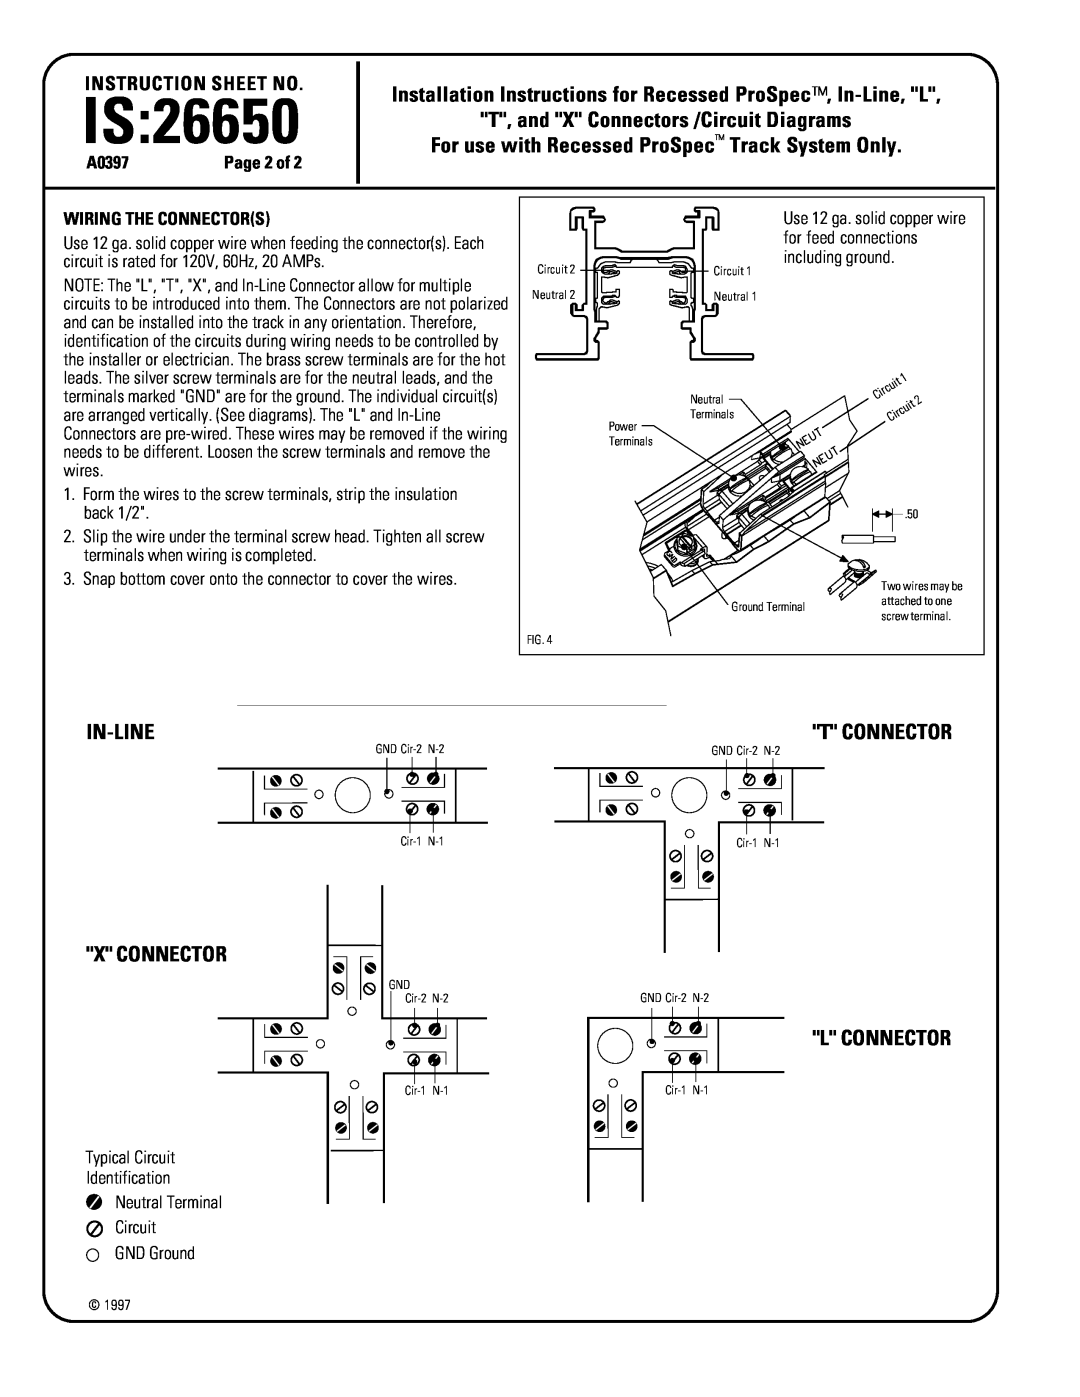 Lightolier Wiring The Connectors, IS26650, Installation Instructions for Recessed ProSpec, In-Line, L, T Connector 